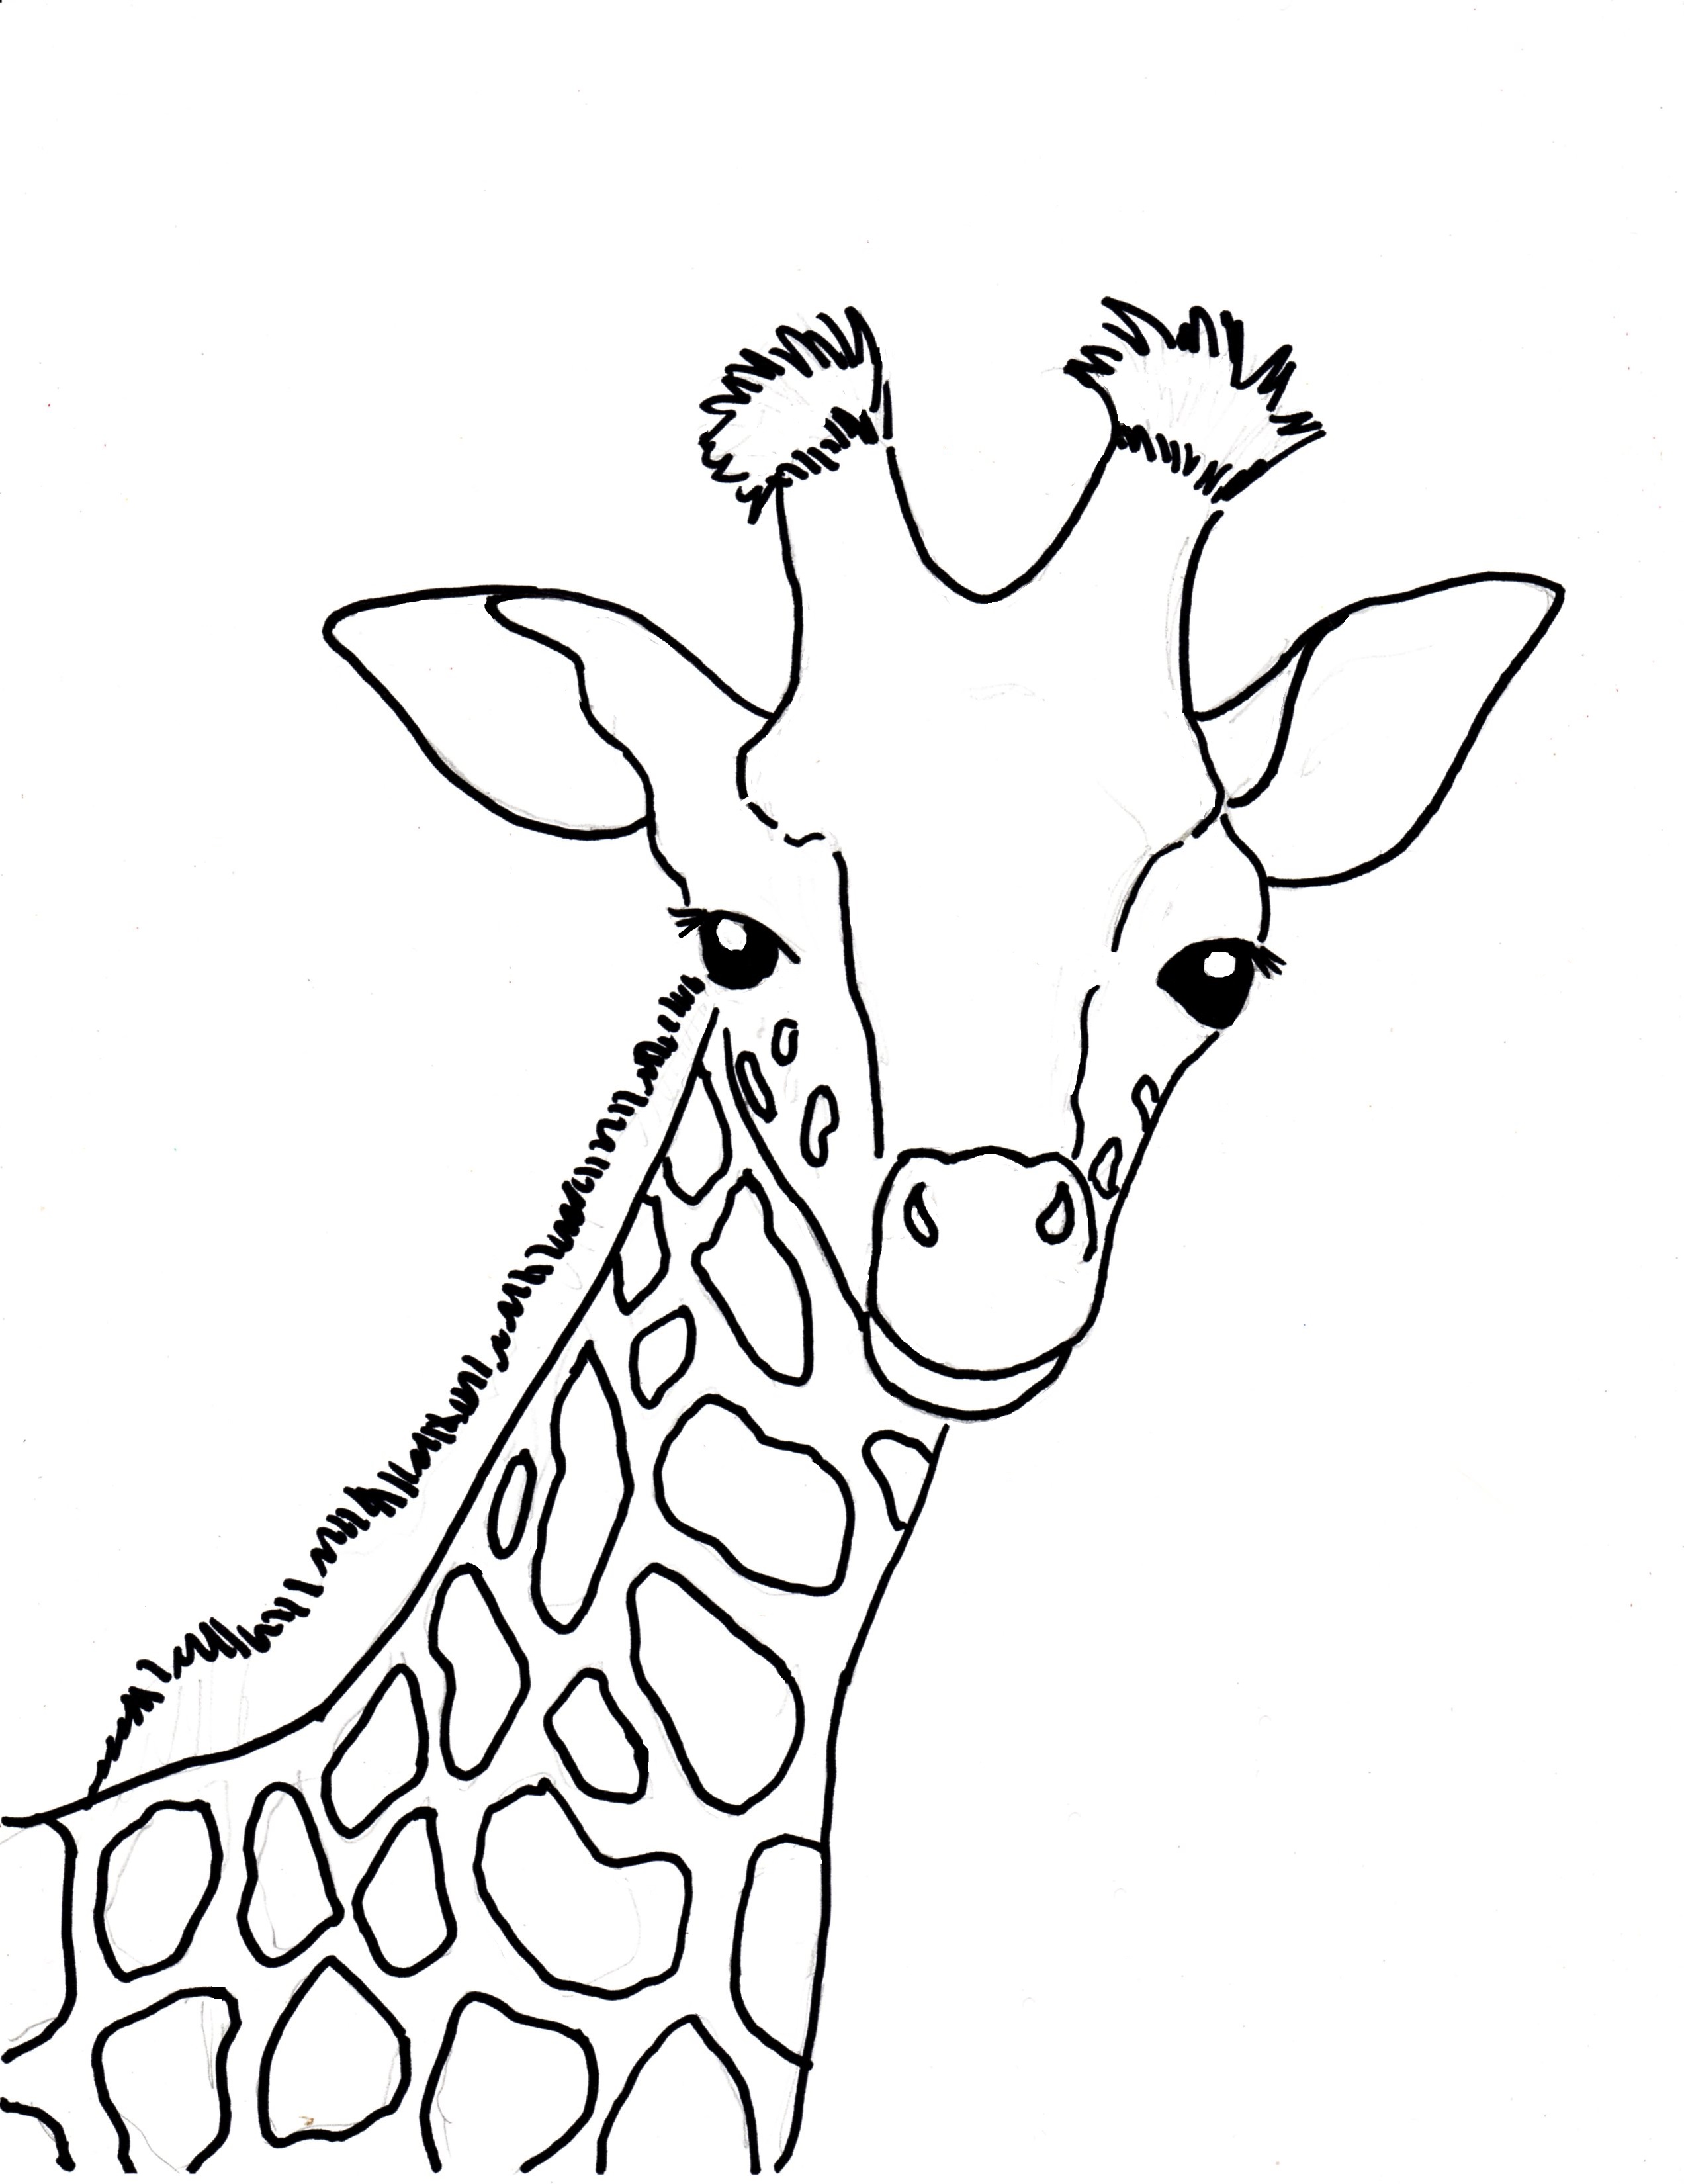 Download Baby Giraffe Coloring Page - Art Starts for Kids